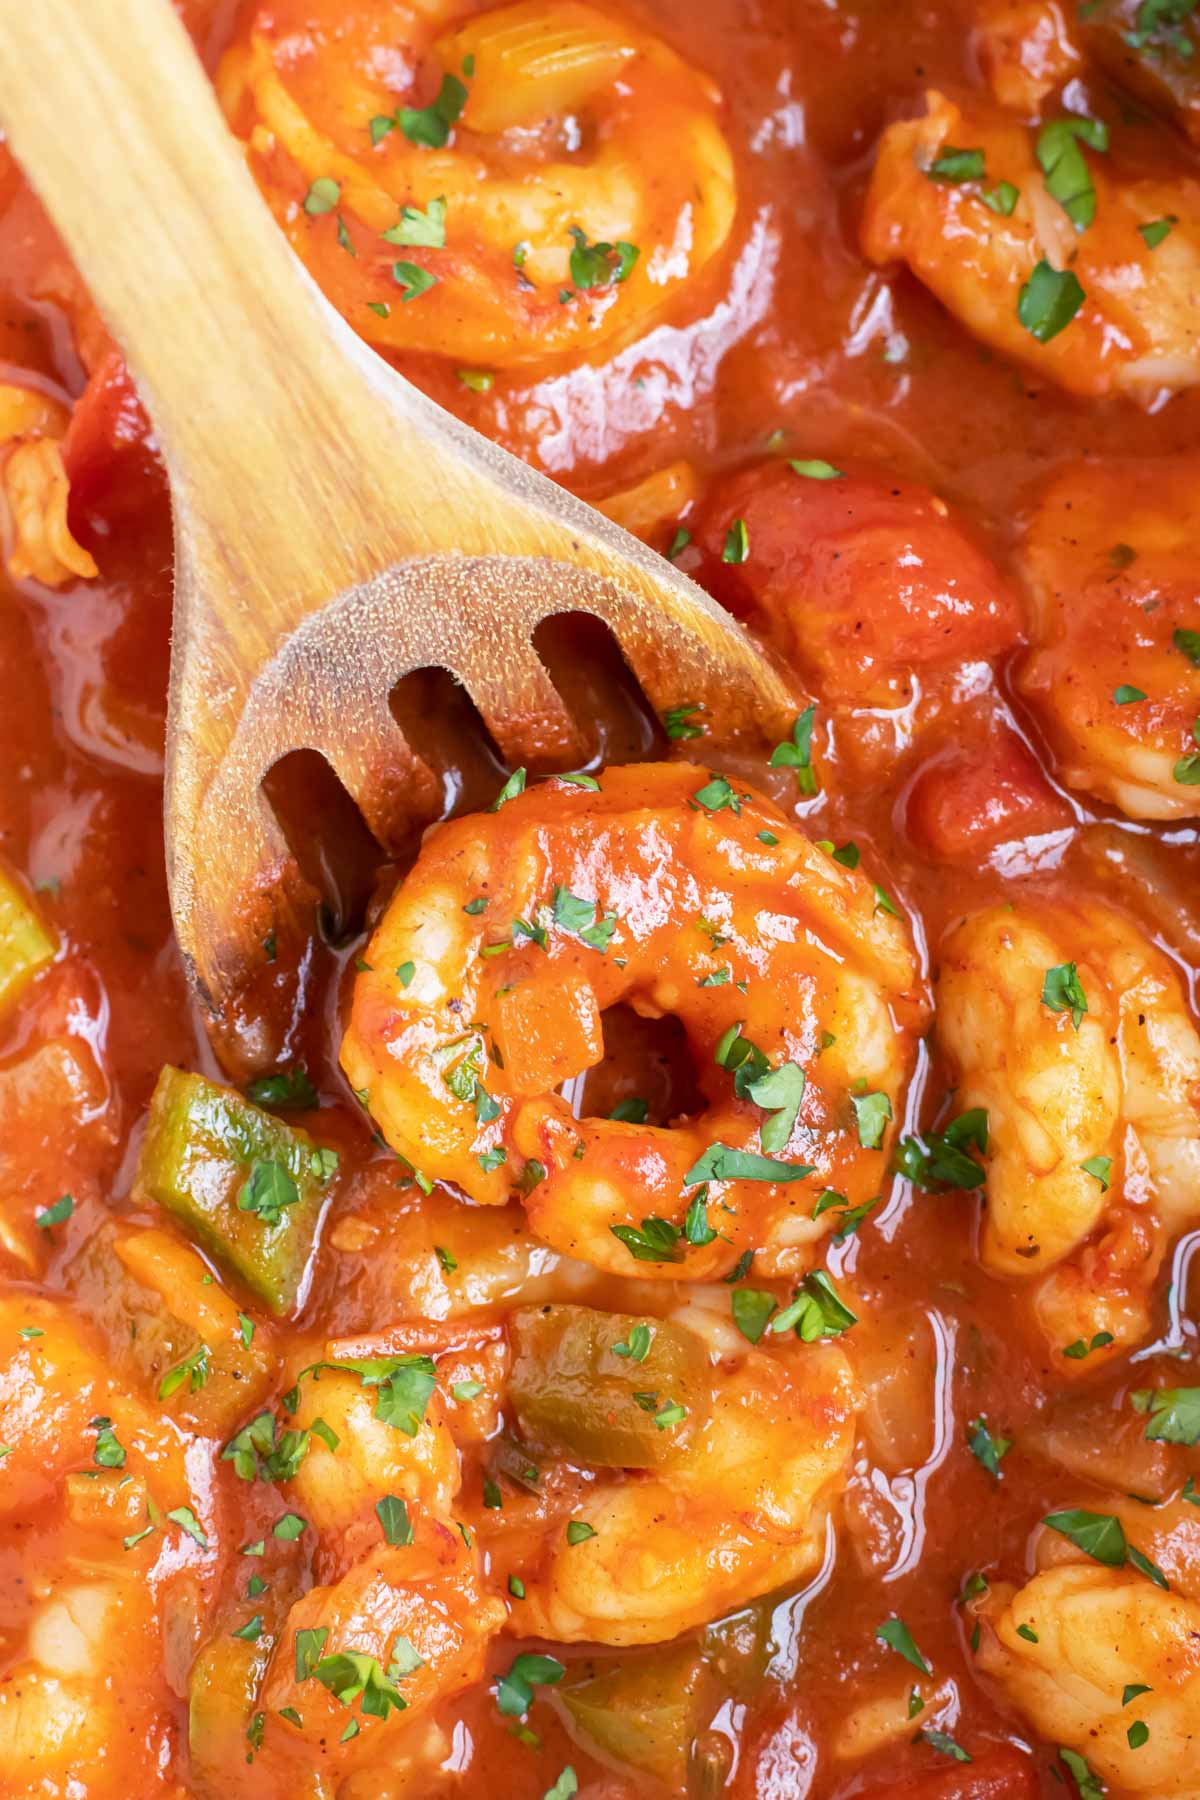 A wooden spoon scooping up a large shrimp in a Cajun tomato sauce.